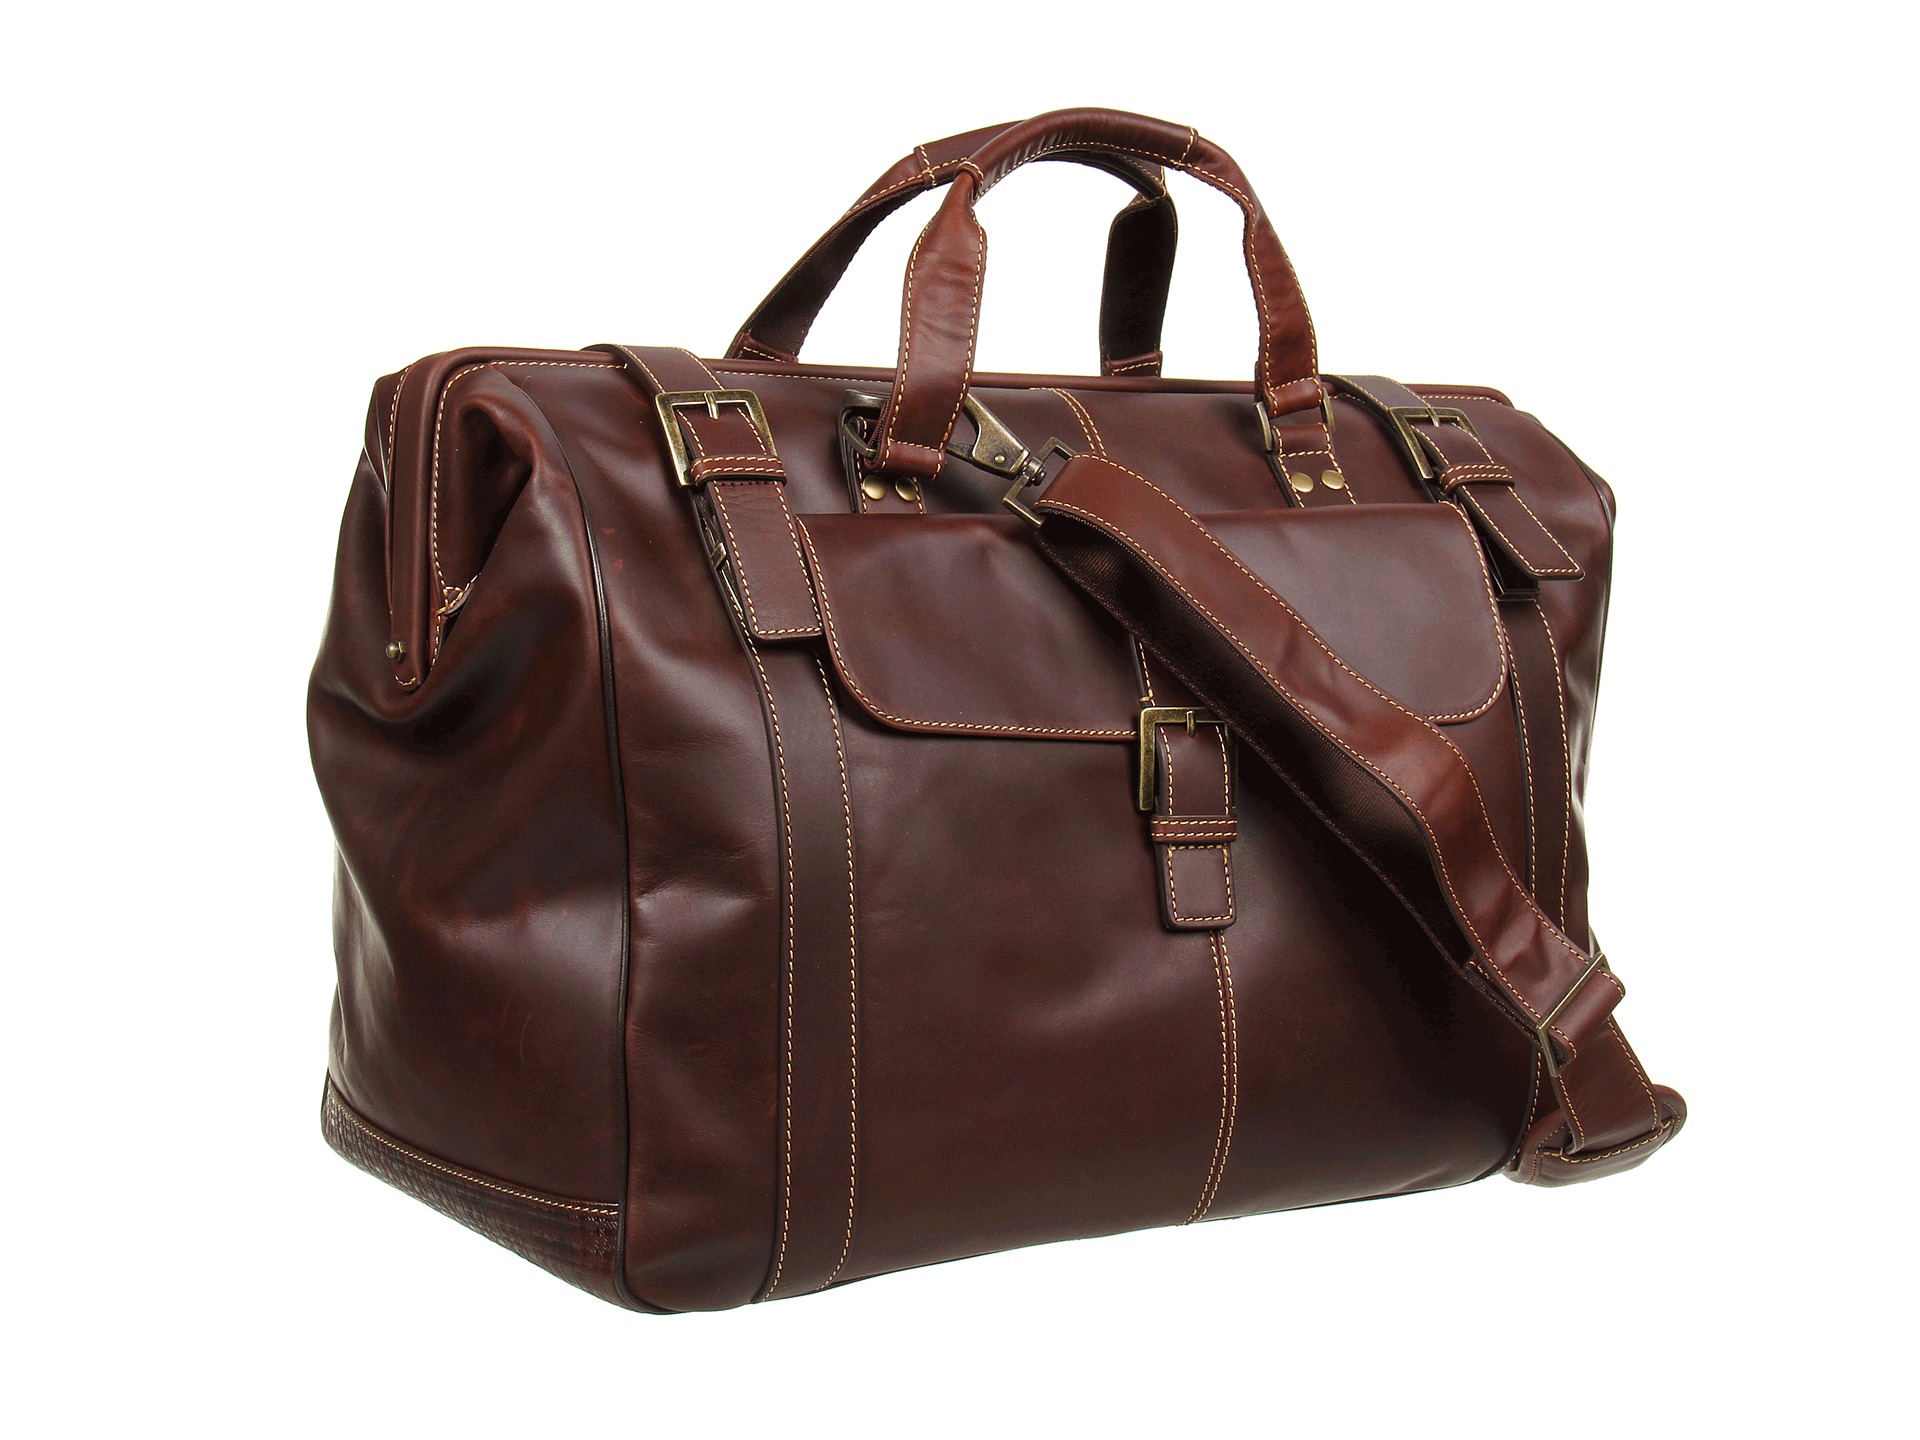 Boconi Bags And Leather Bryant Safari Bag | Shipped Free at Zappos